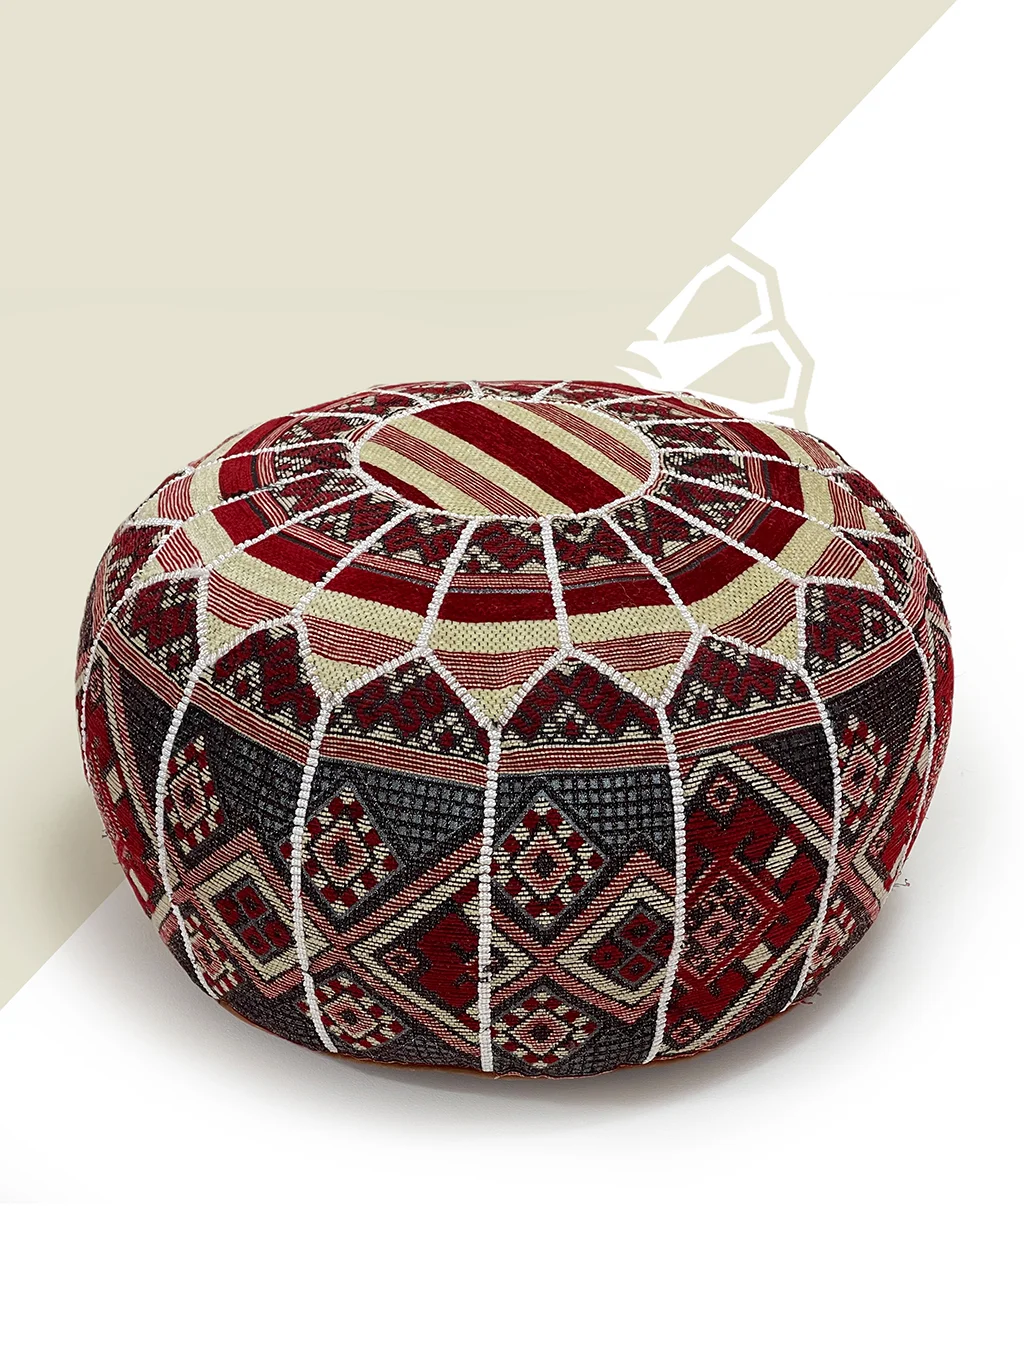 How to stuff your Moroccan Pouf - 2 Solutions : u/marrakech-chic